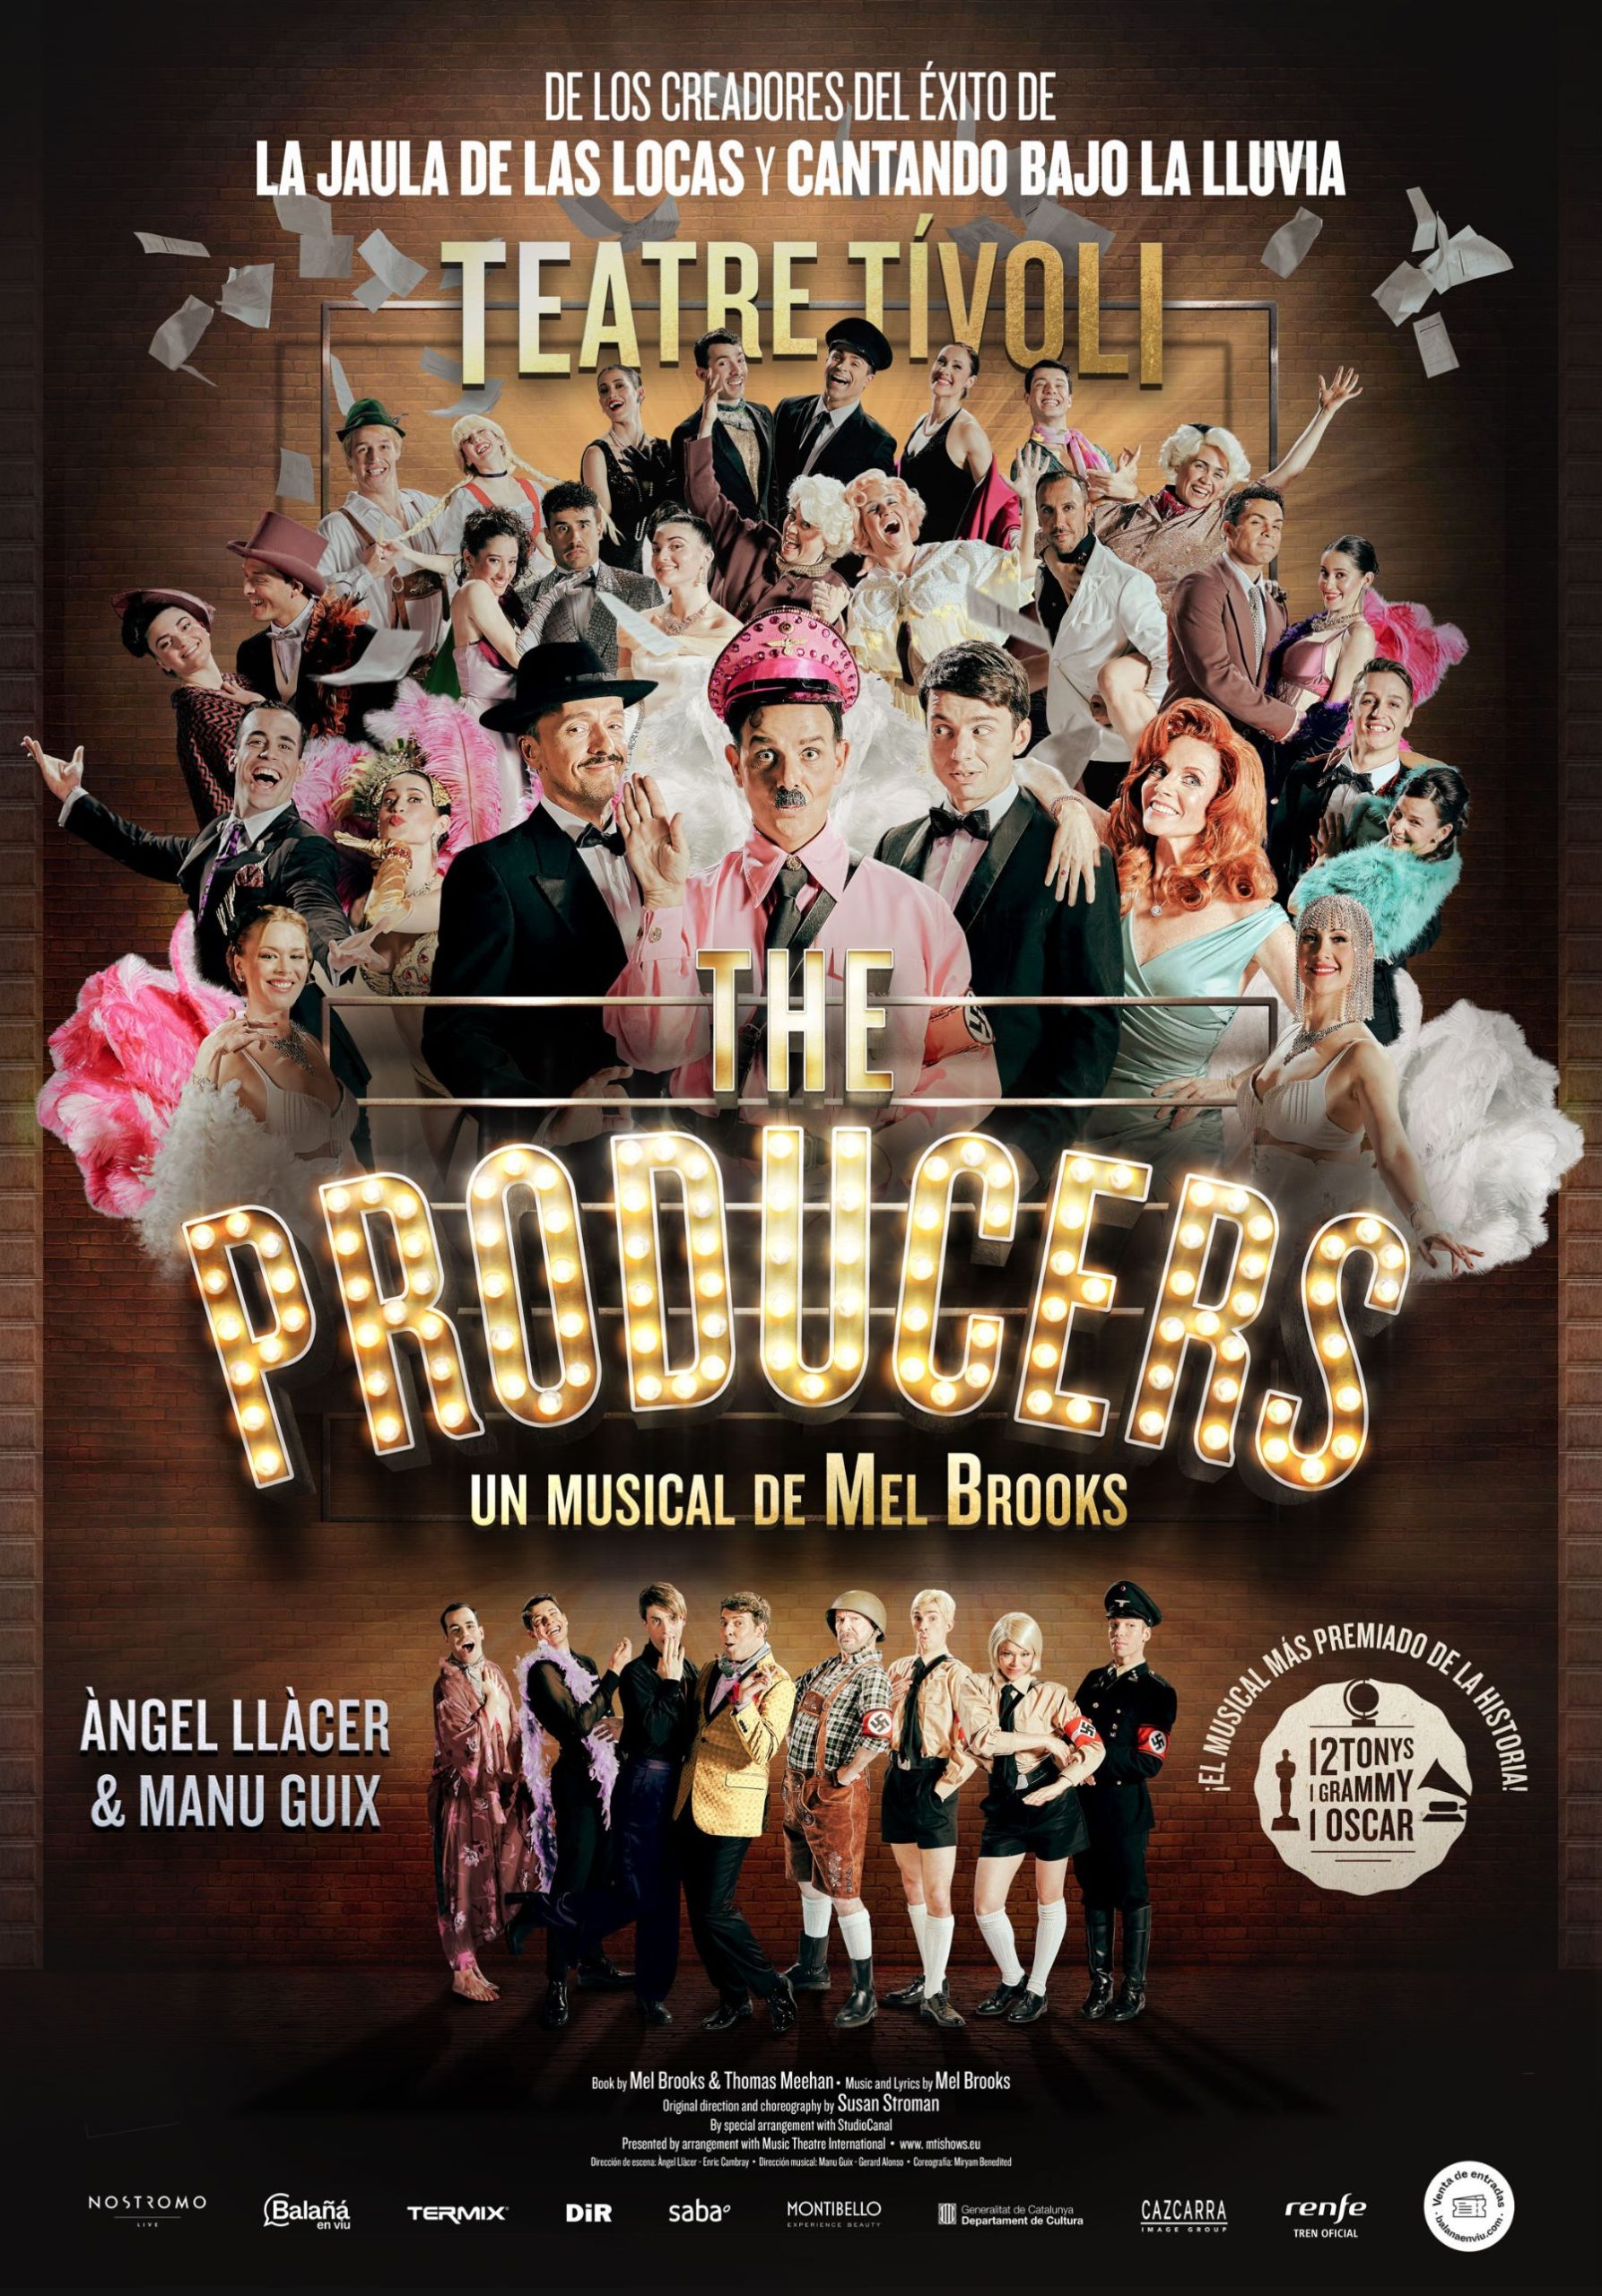 THE PRODUCERS